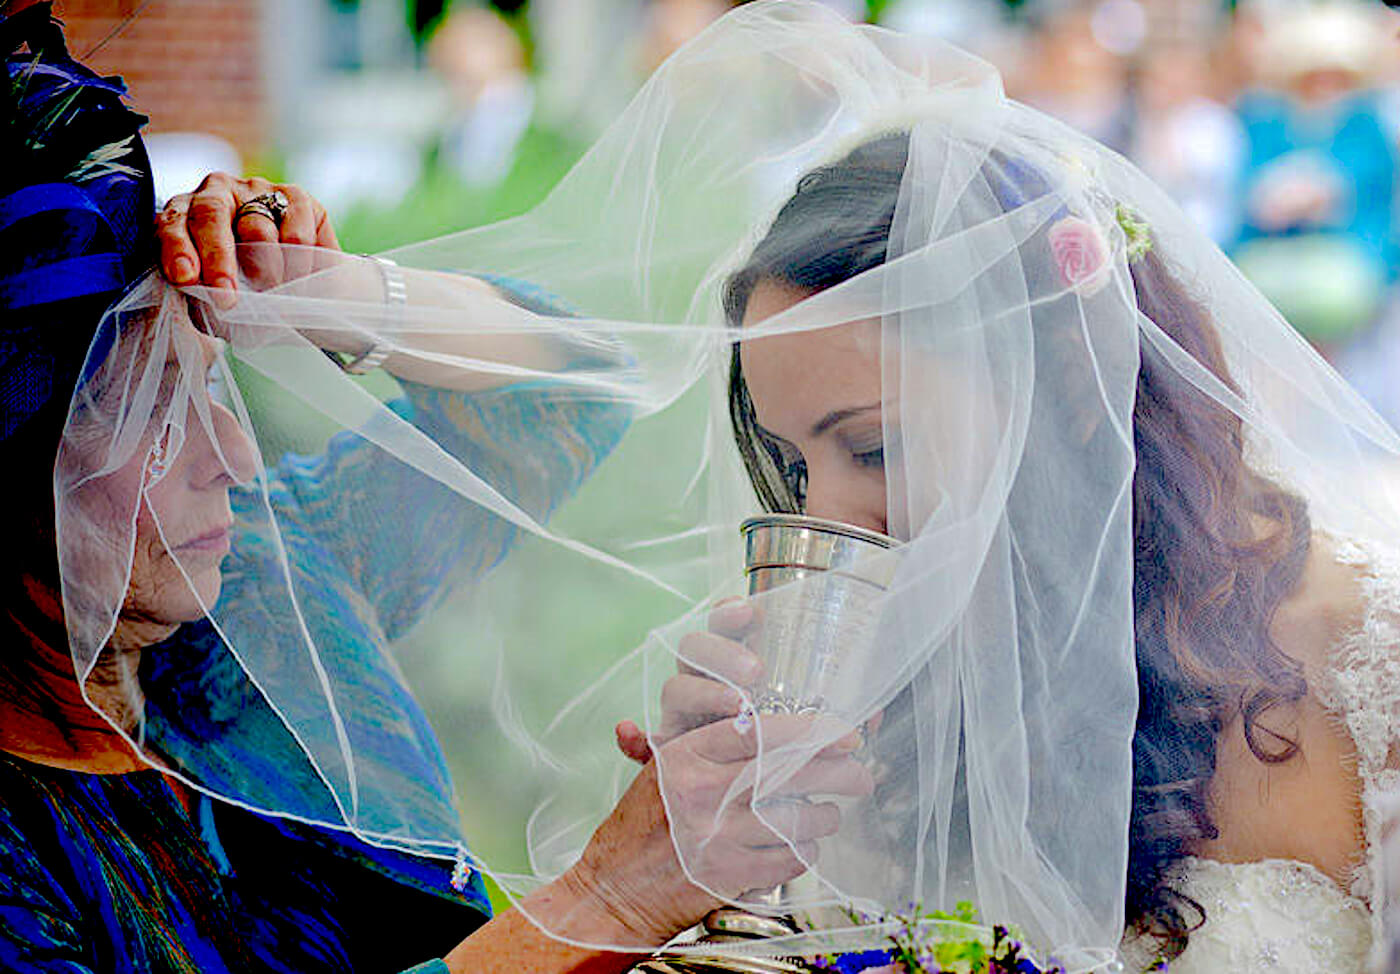 Mother of the bride passing a cup of wine to her daughter during a Jewish wedding iled by a rabbi in Europe.